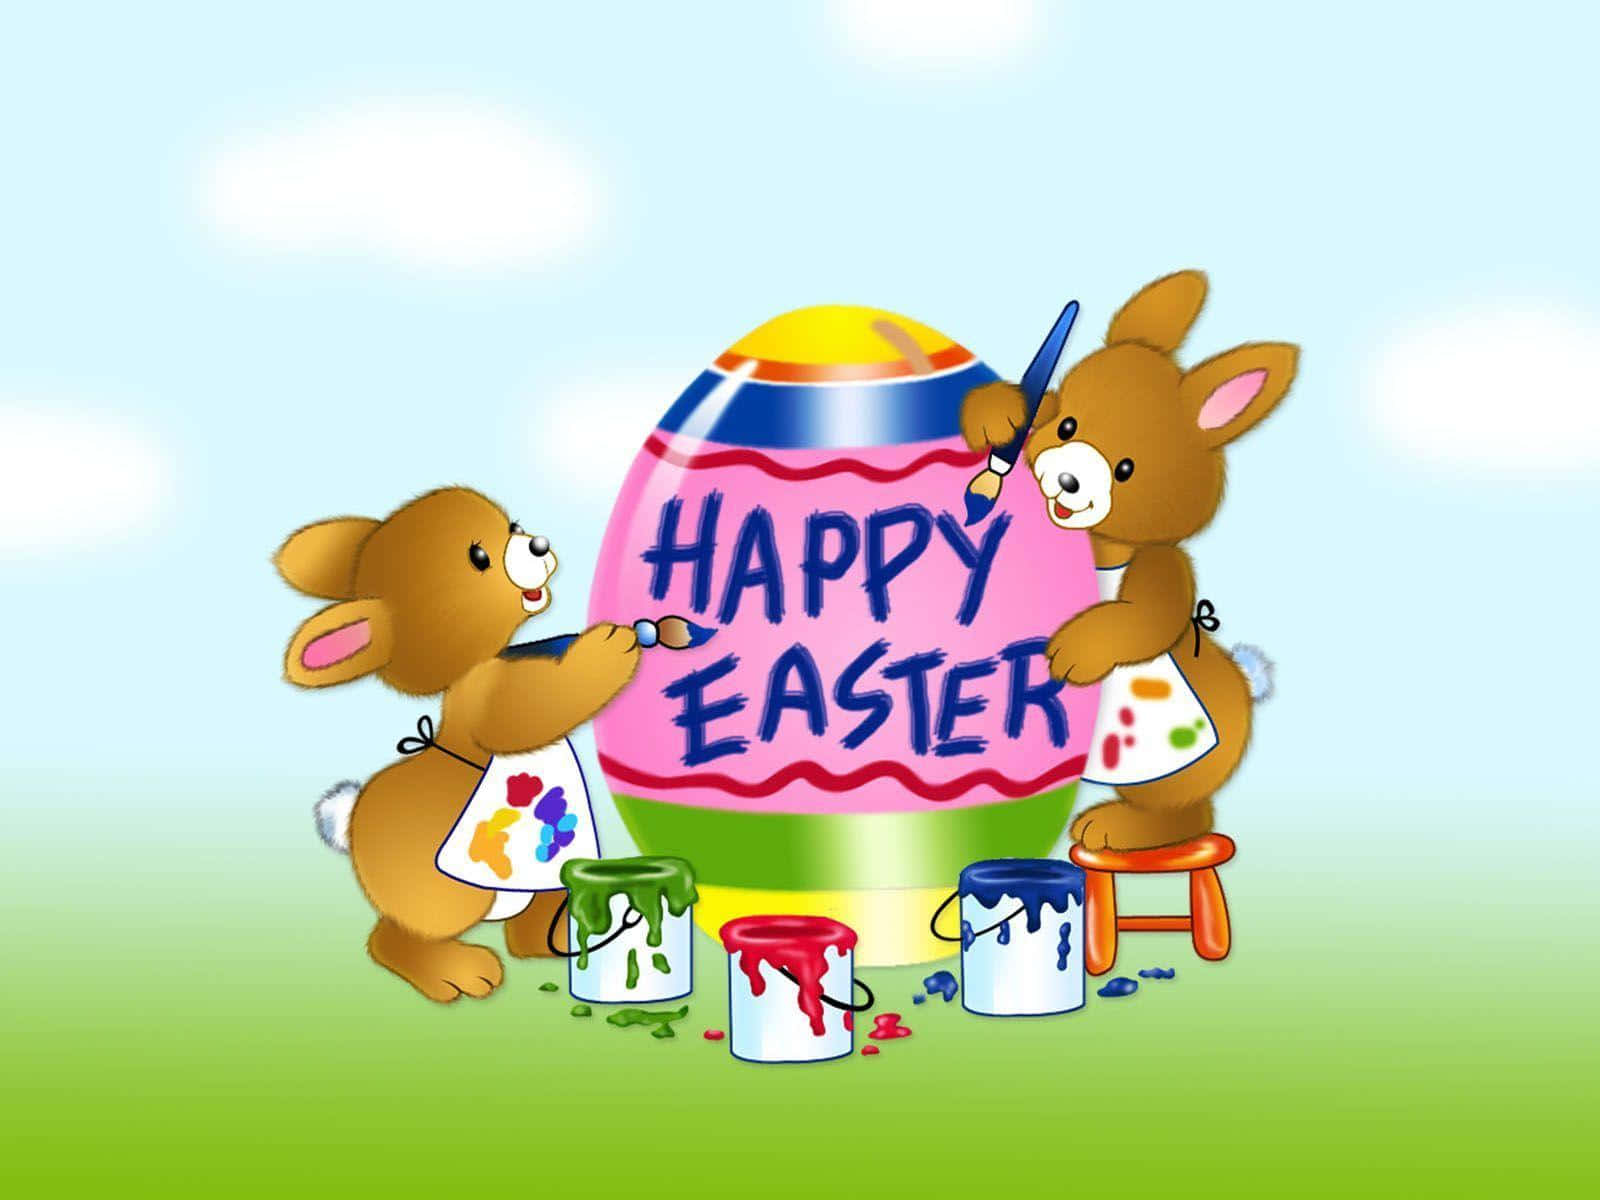 Celebrate this Easter with Cute and Happy Memories! Wallpaper